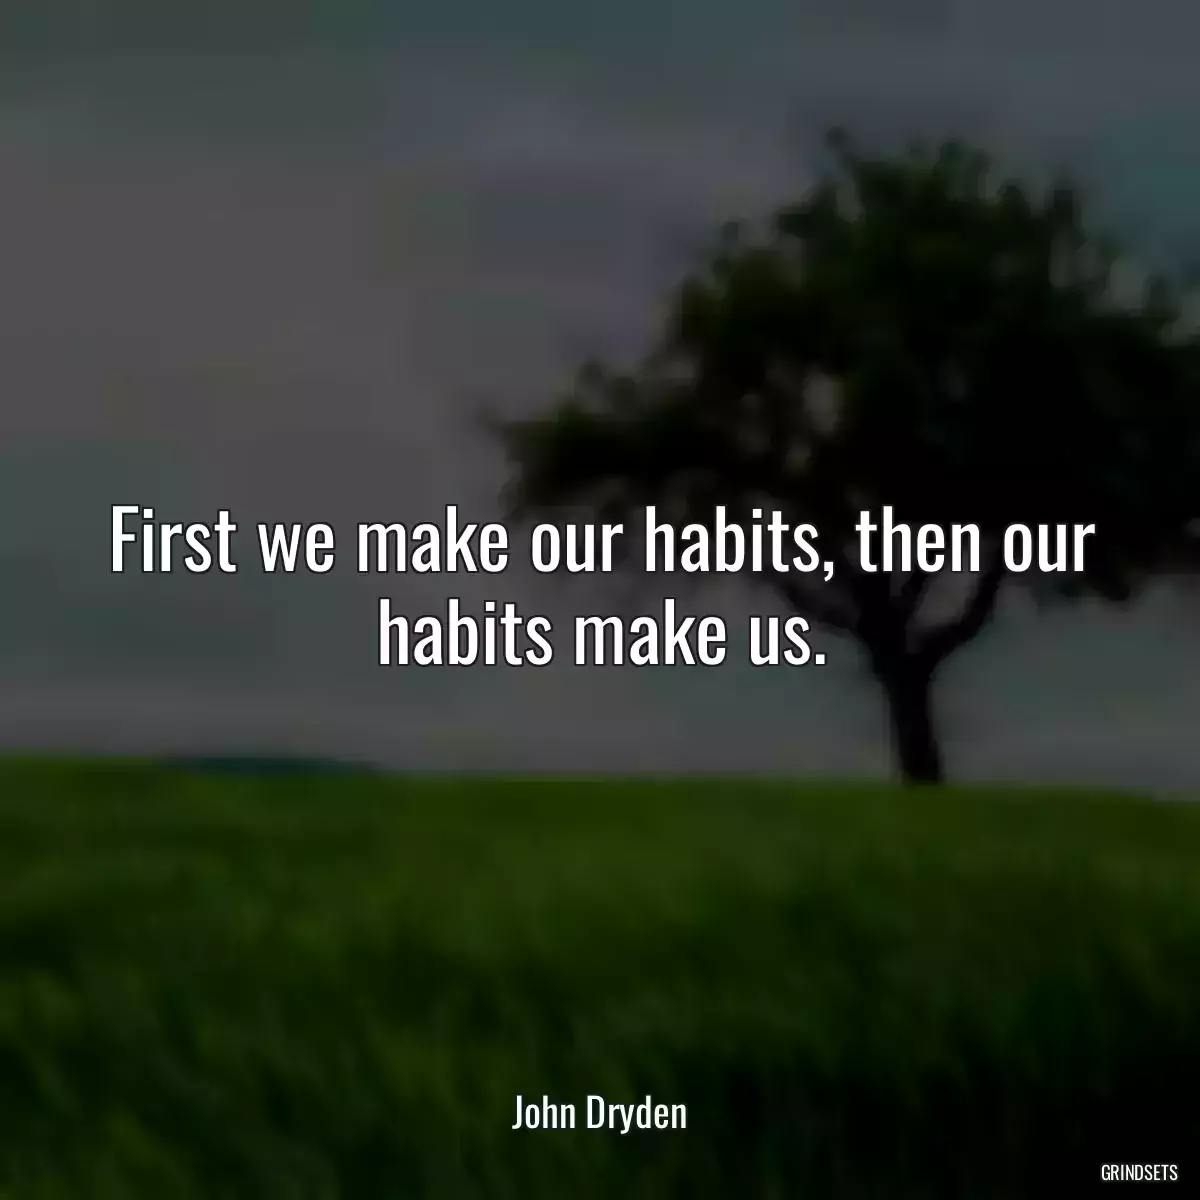 First we make our habits, then our habits make us.